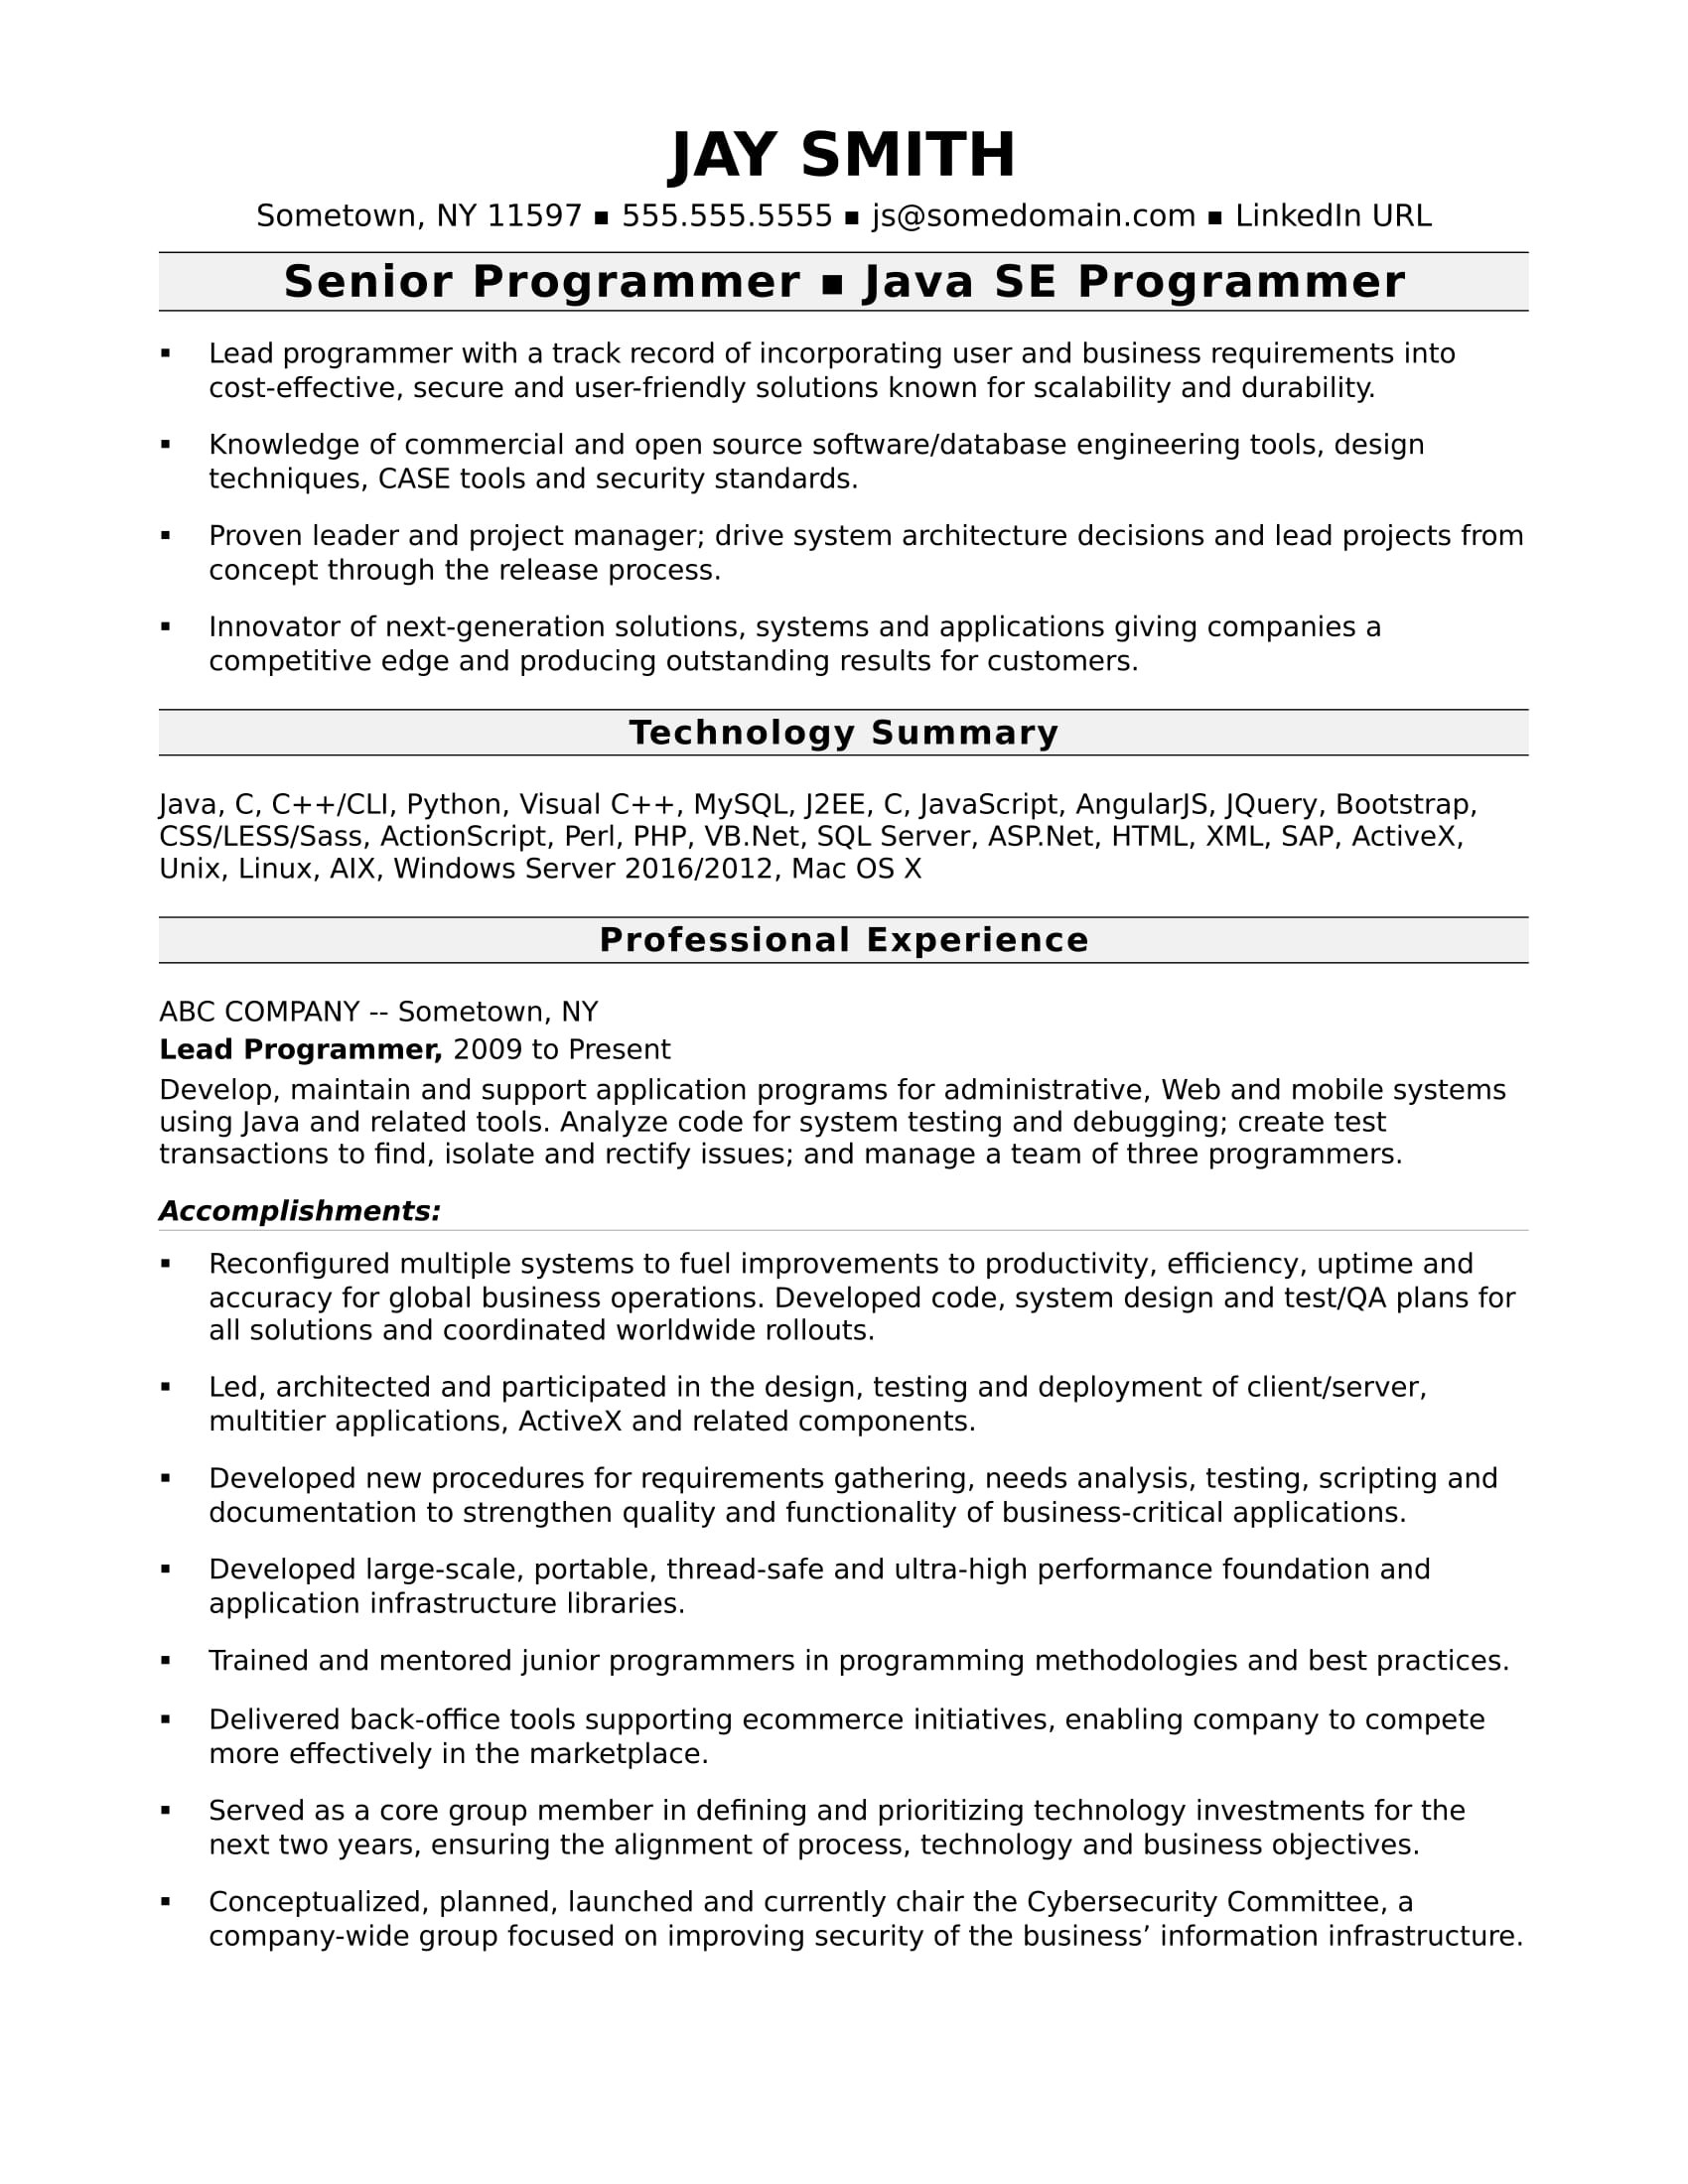 Angularjs Java Resume Samples with Projects Handled Programmer Resume Template Monster.com